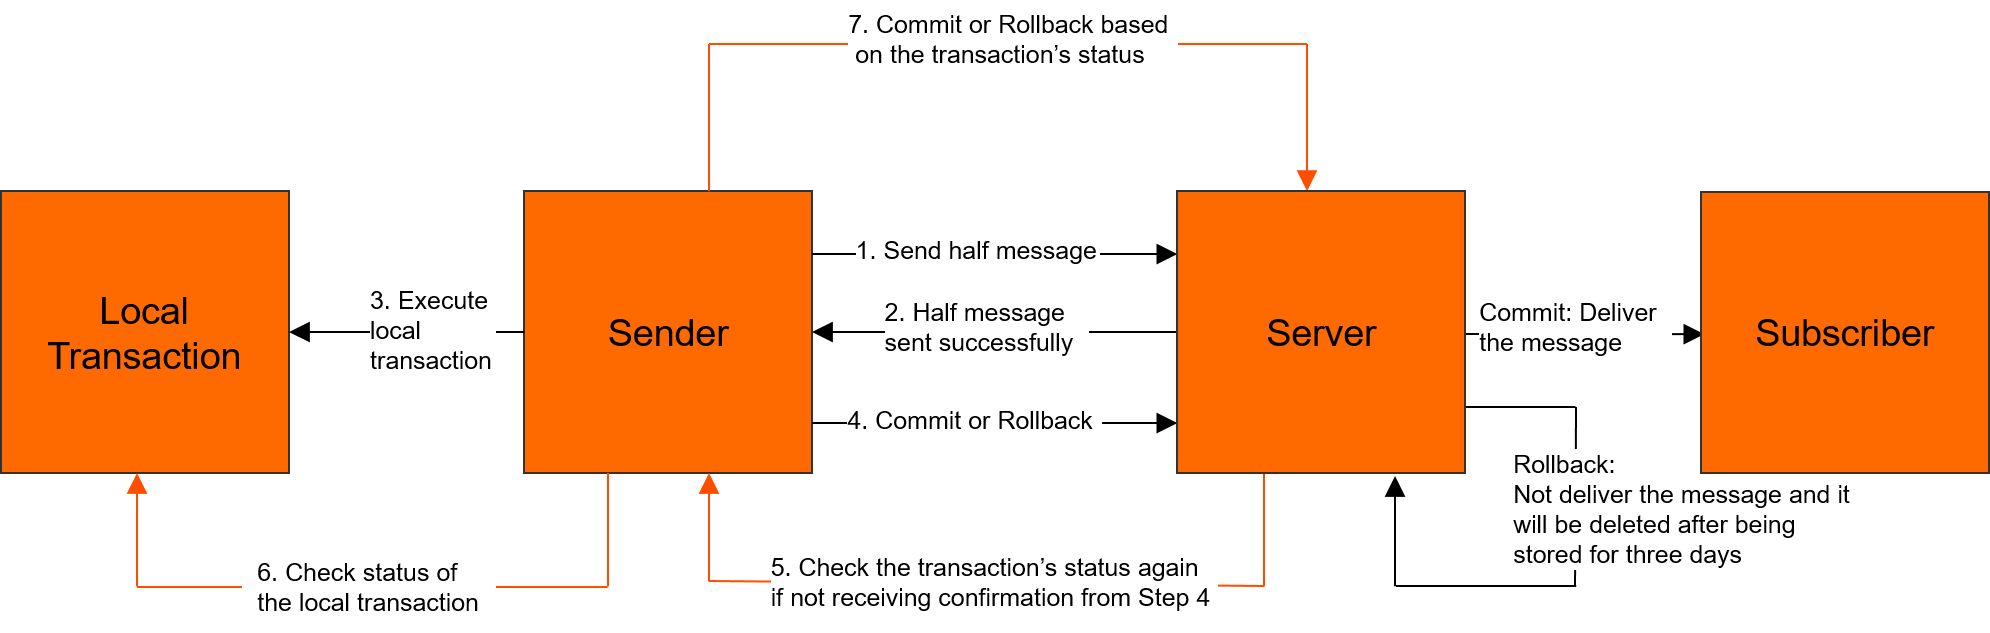 Interaction process of transactional messages